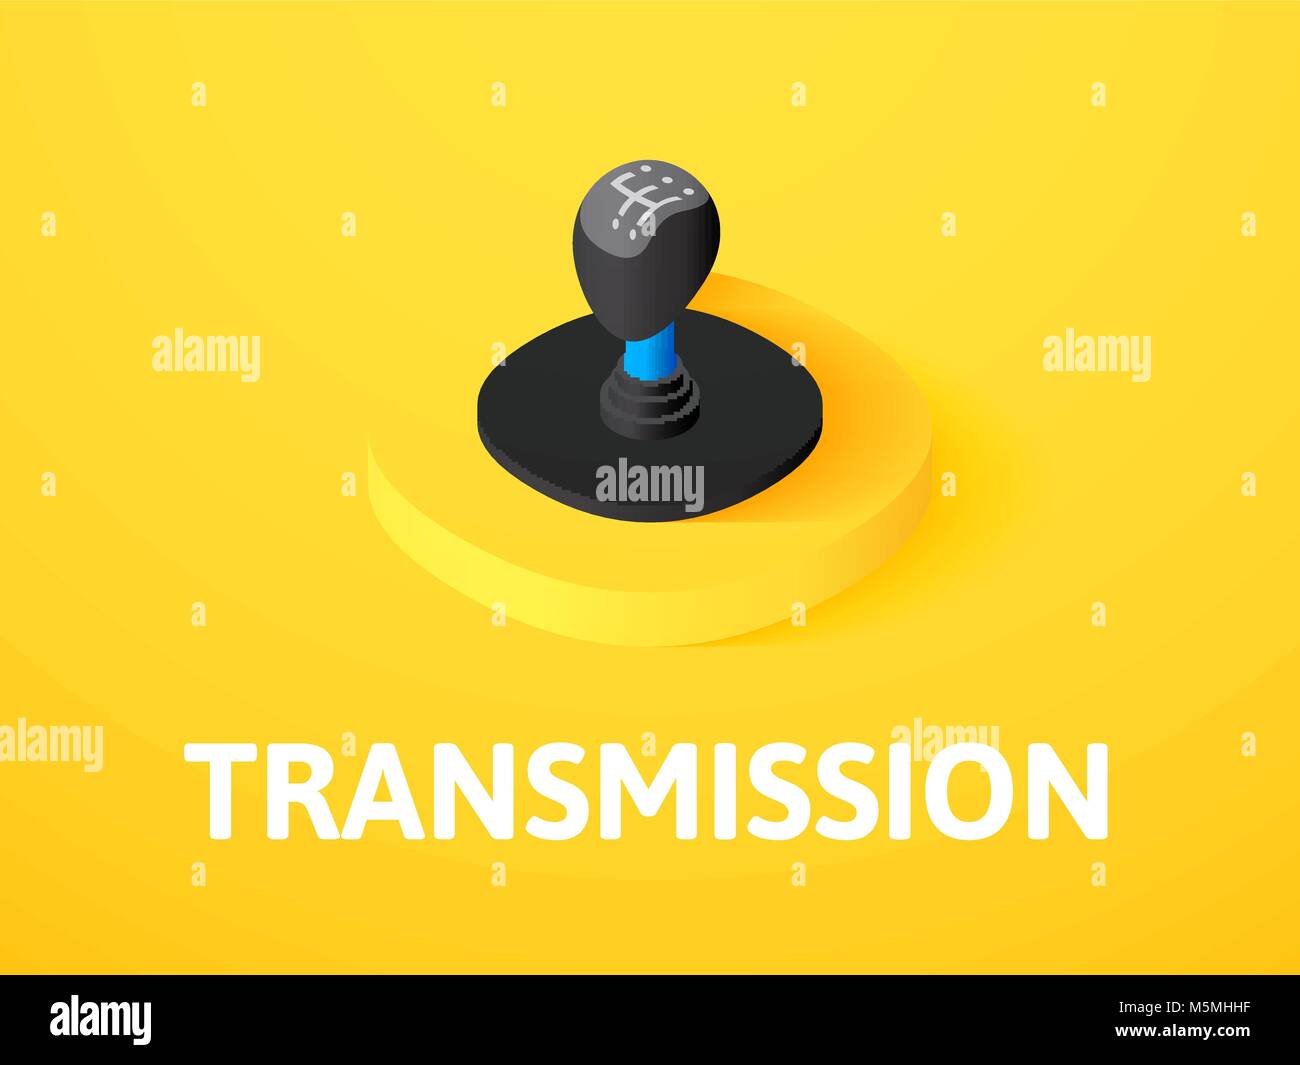 Transmission isometric icon, isolated on color background Stock Vector